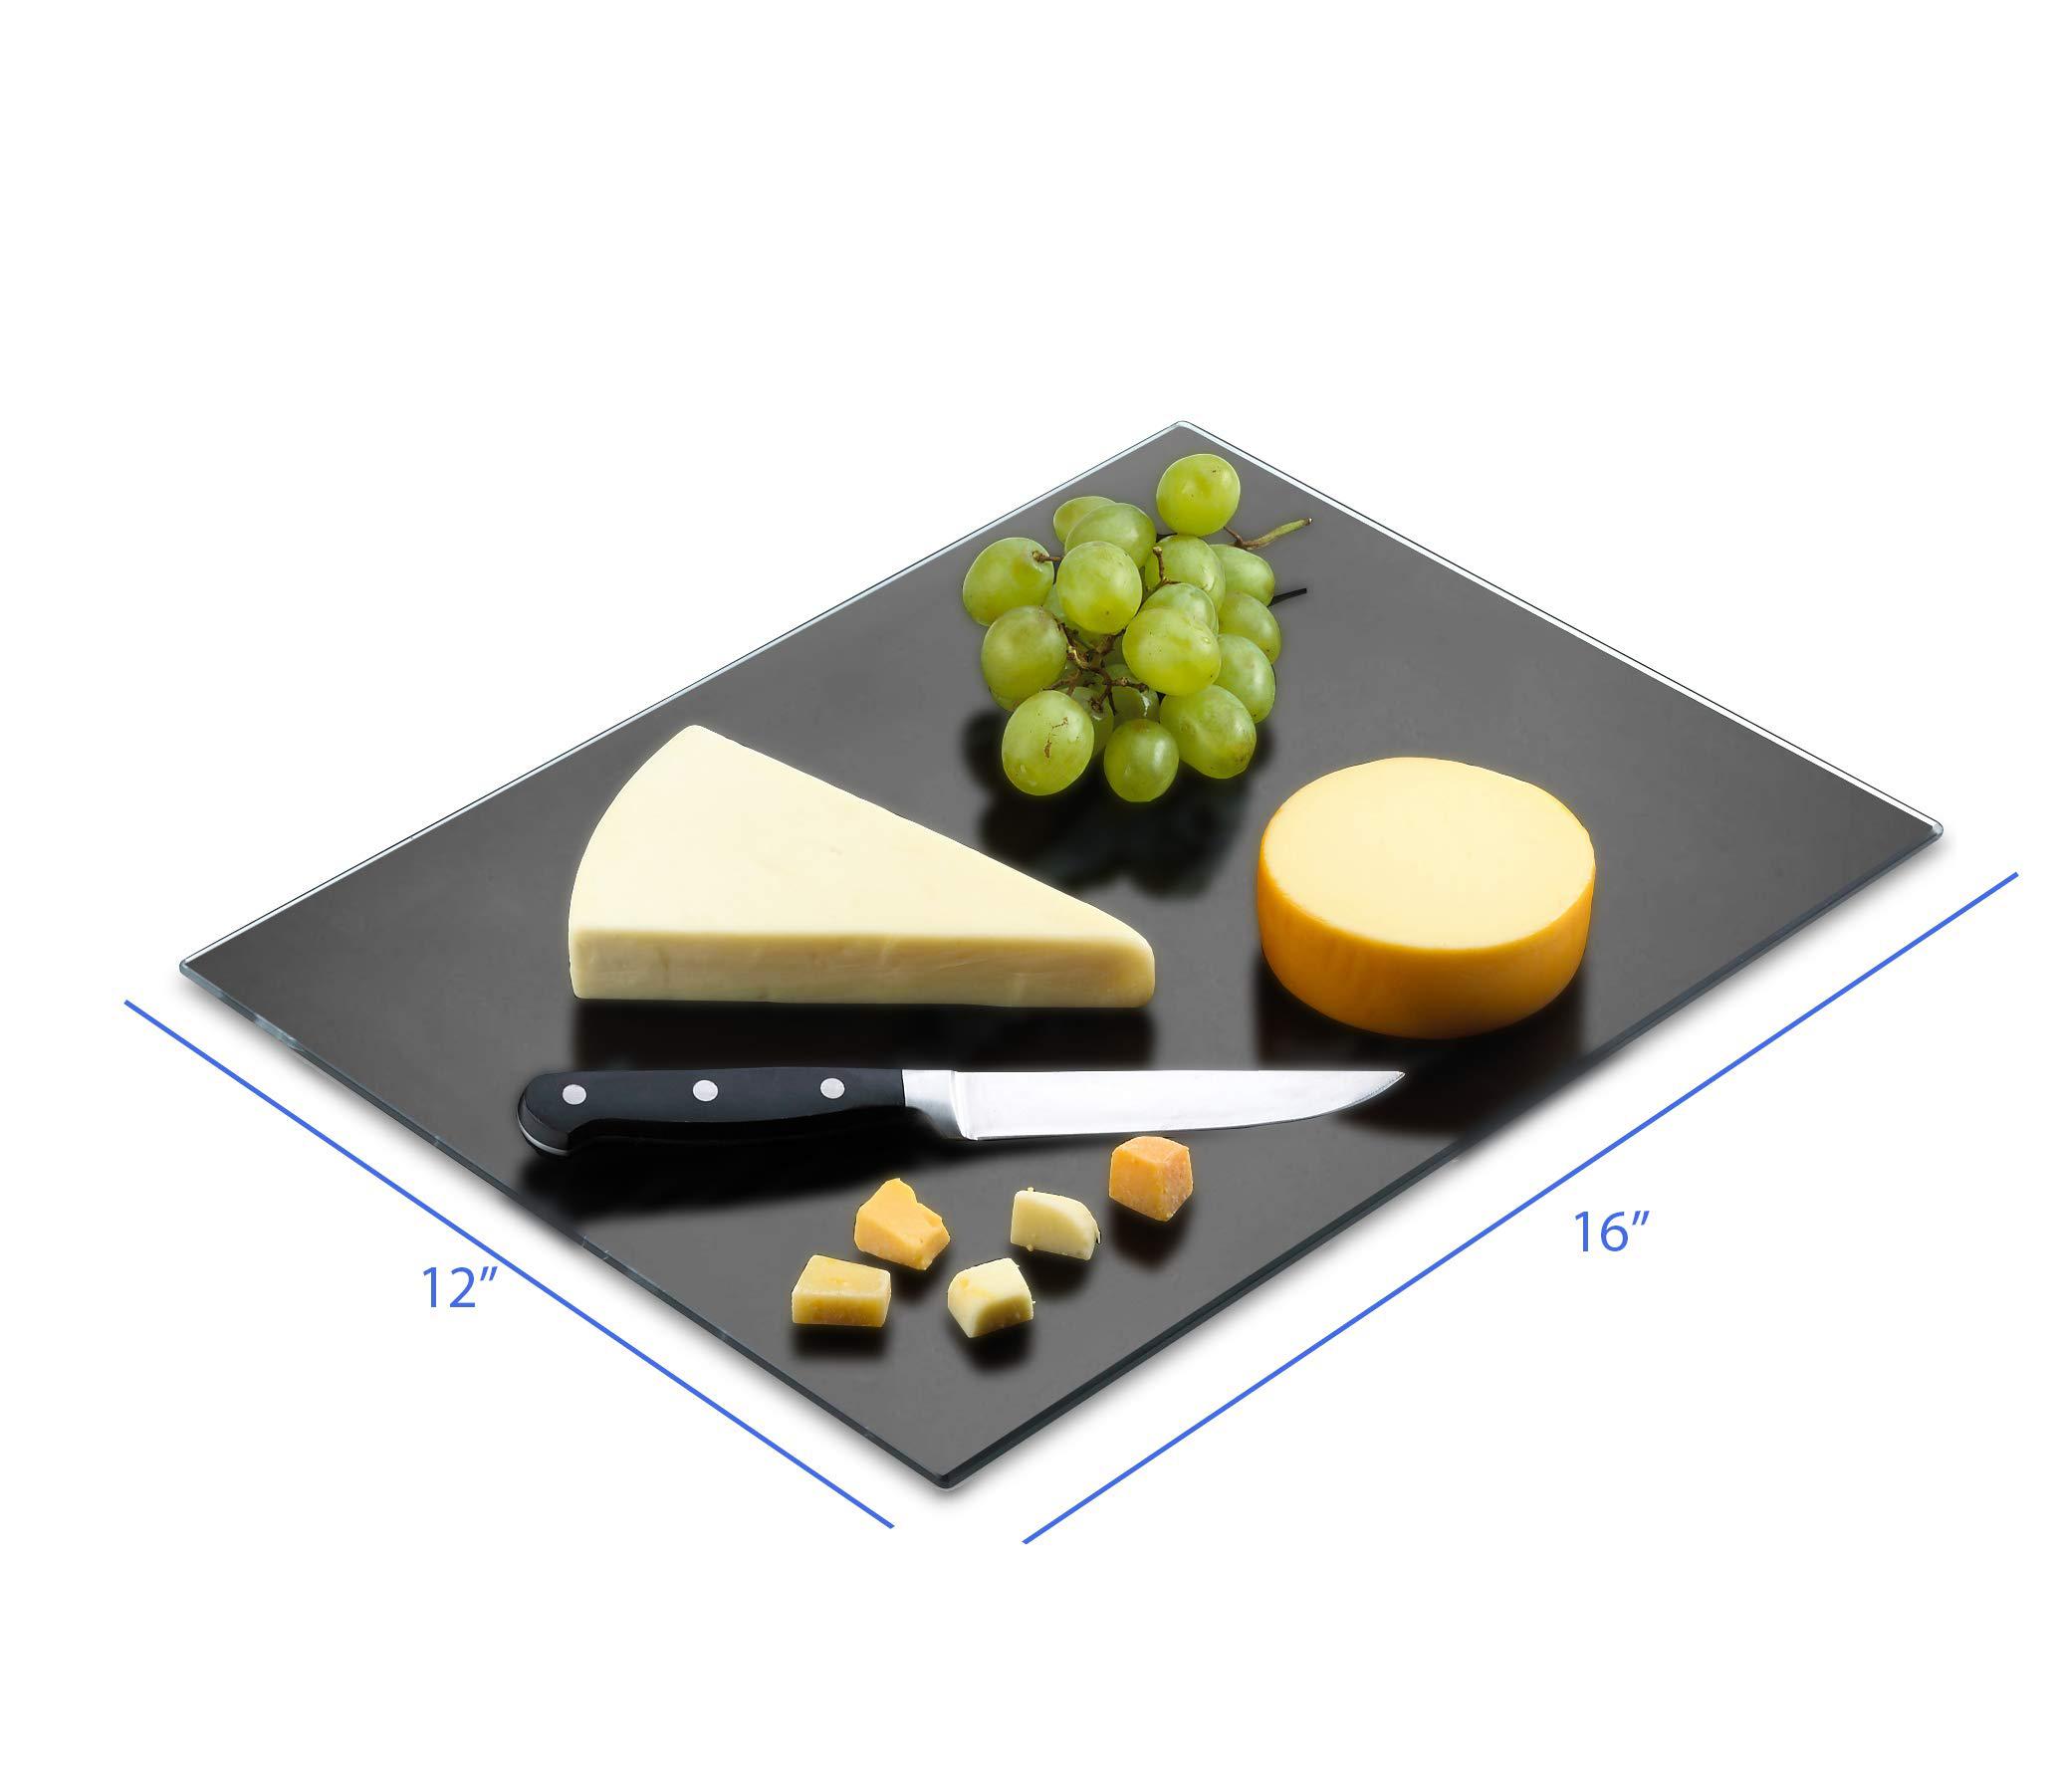 PARNOO tempered black glass cutting board - long lasting black ink glass - scratch resistant, heat resistant, shatter resistant, dis